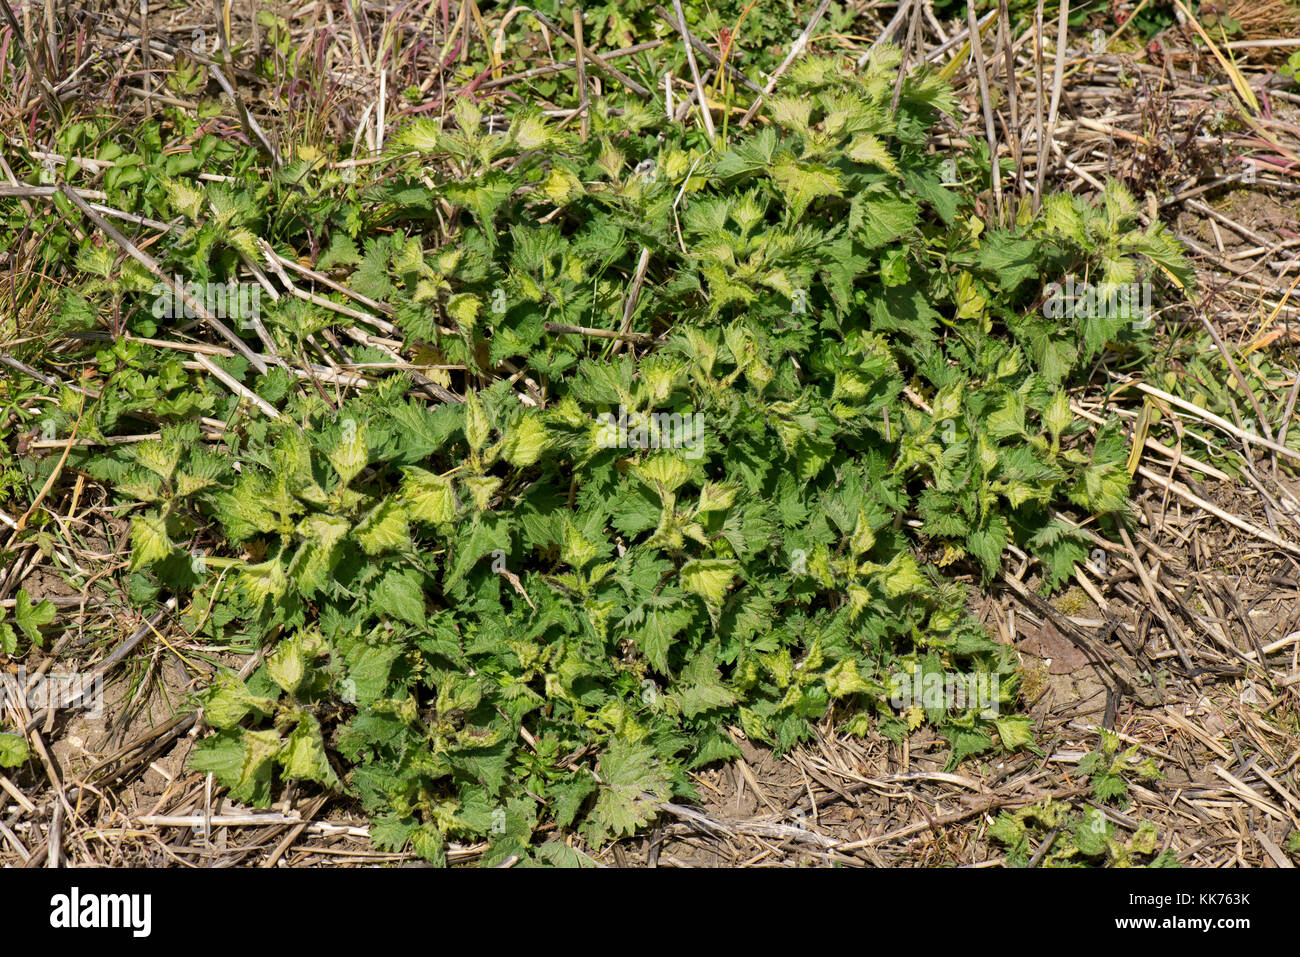 Stinging nettle, Urtica dioica, treated and killed with glyphosate before minimum cultivation seedbed preparation Stock Photo